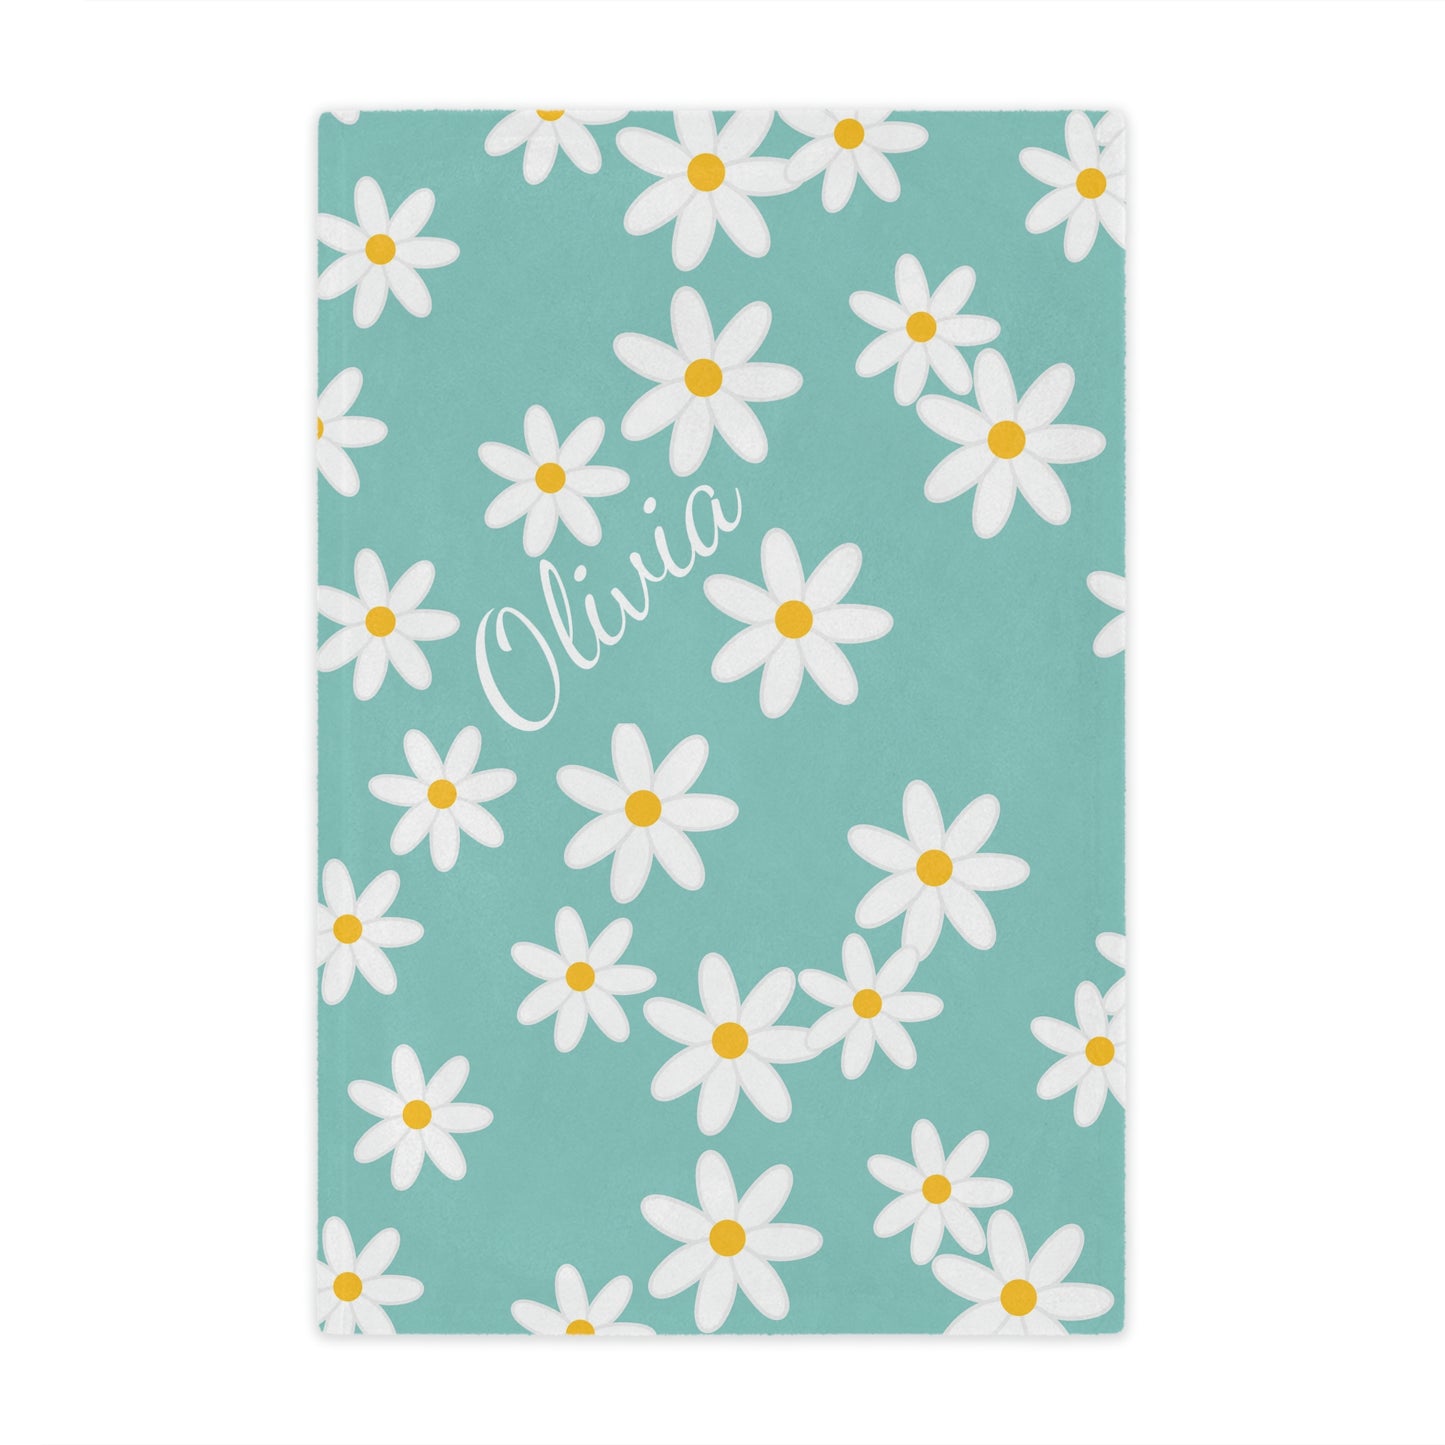 Personalized Name Teal Daisy Blanket